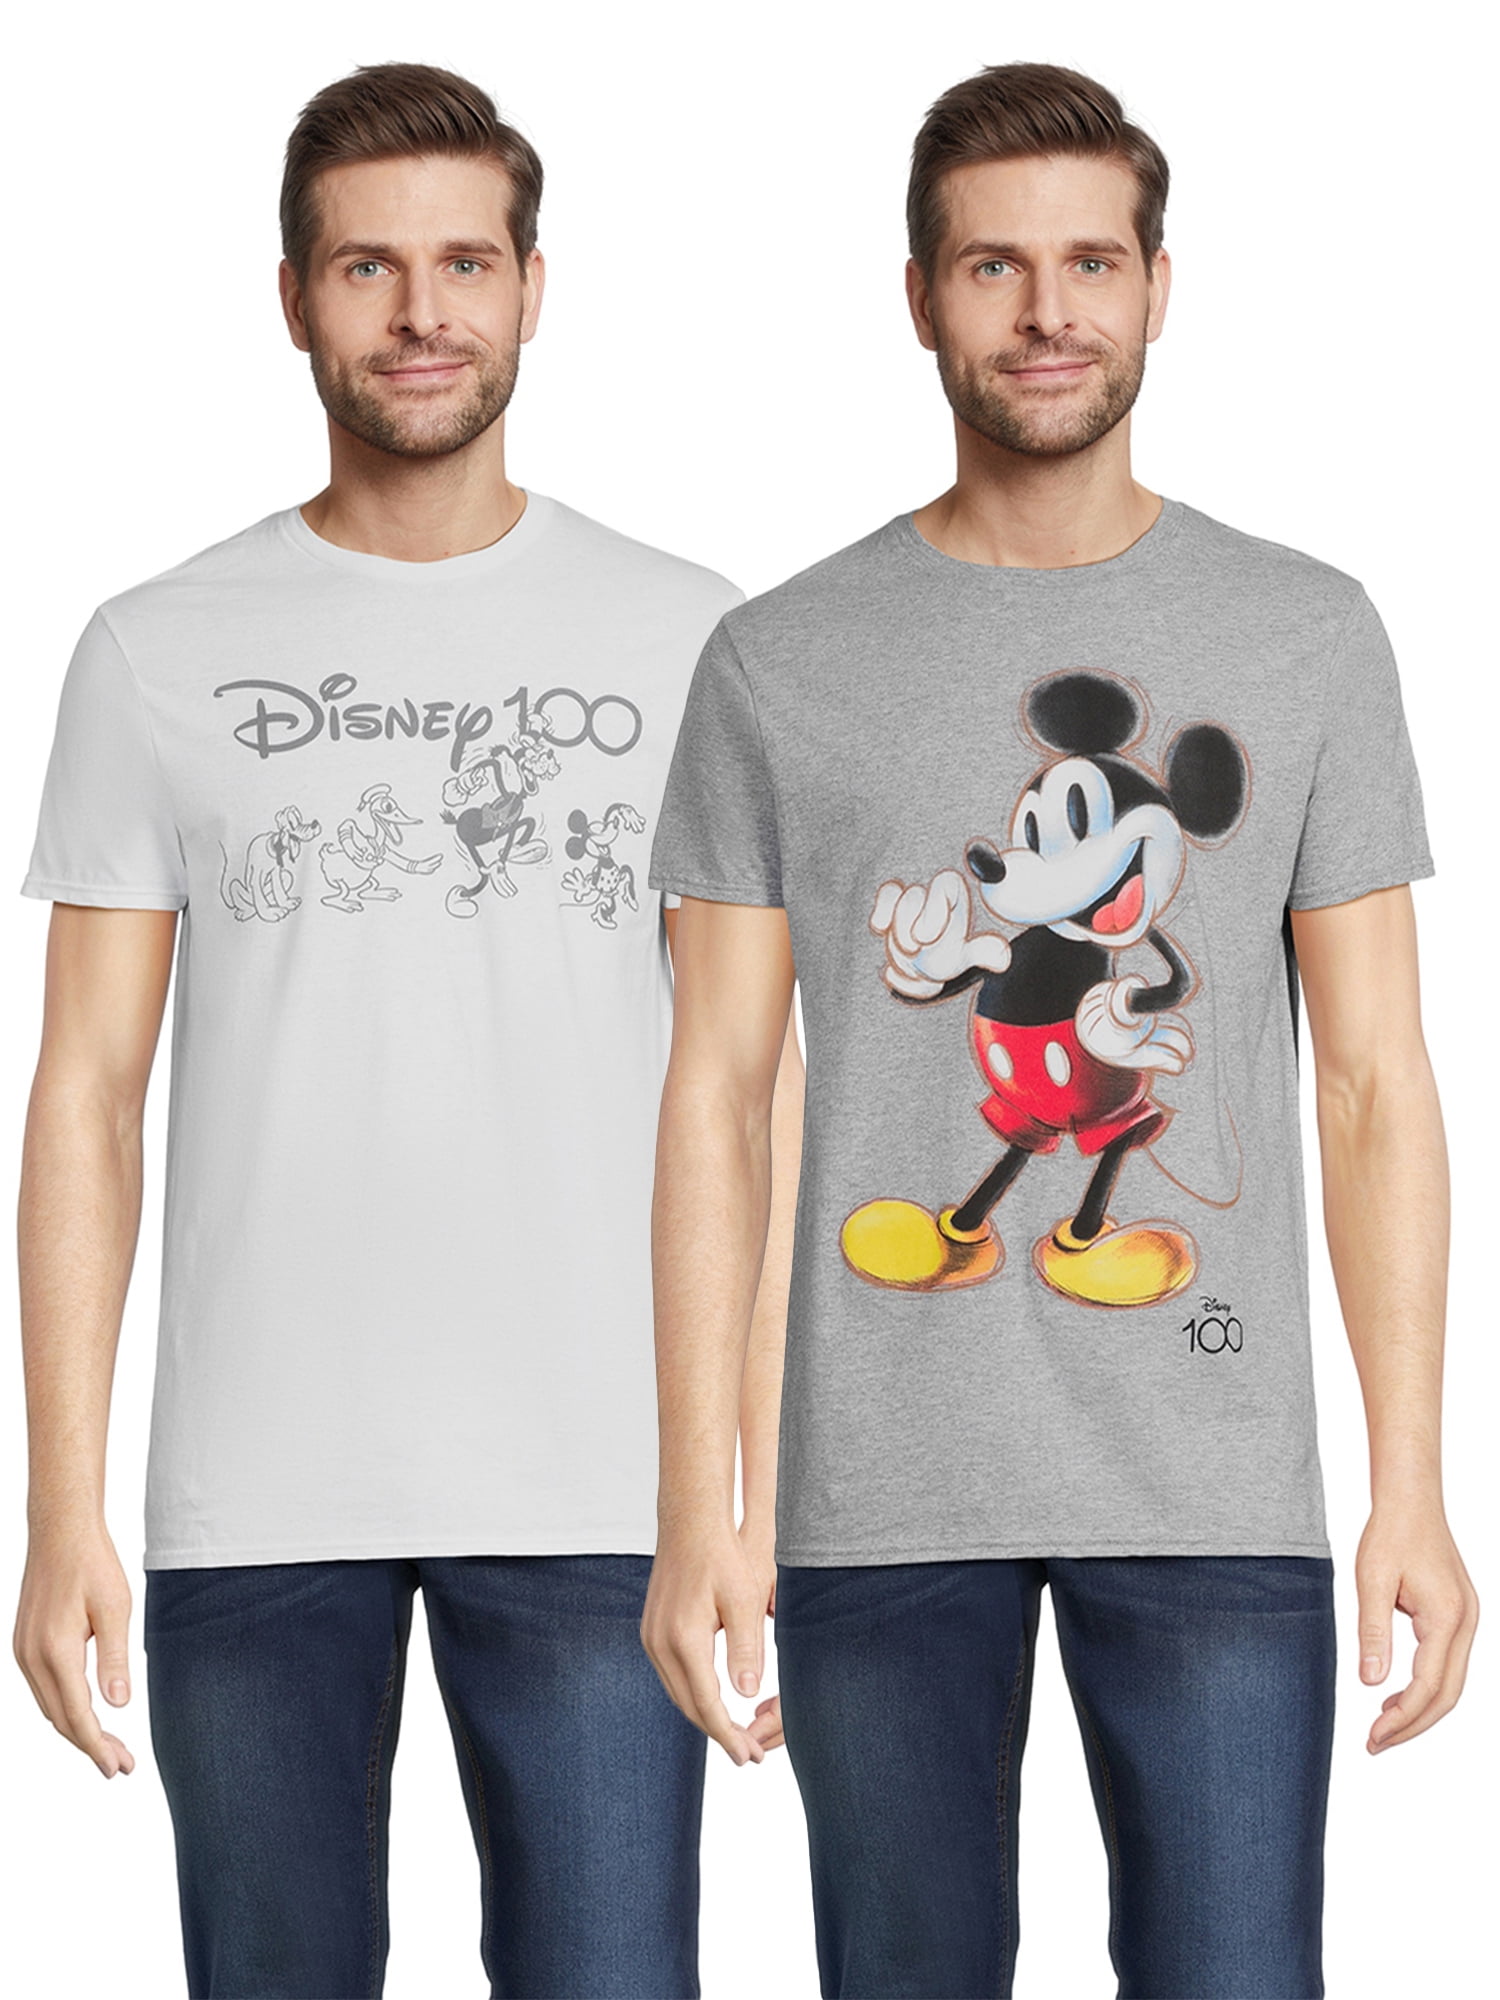 Mickey Mouse and Big Men's T-Shirts, 2-Pack, Sizes S-5XL - Walmart.com